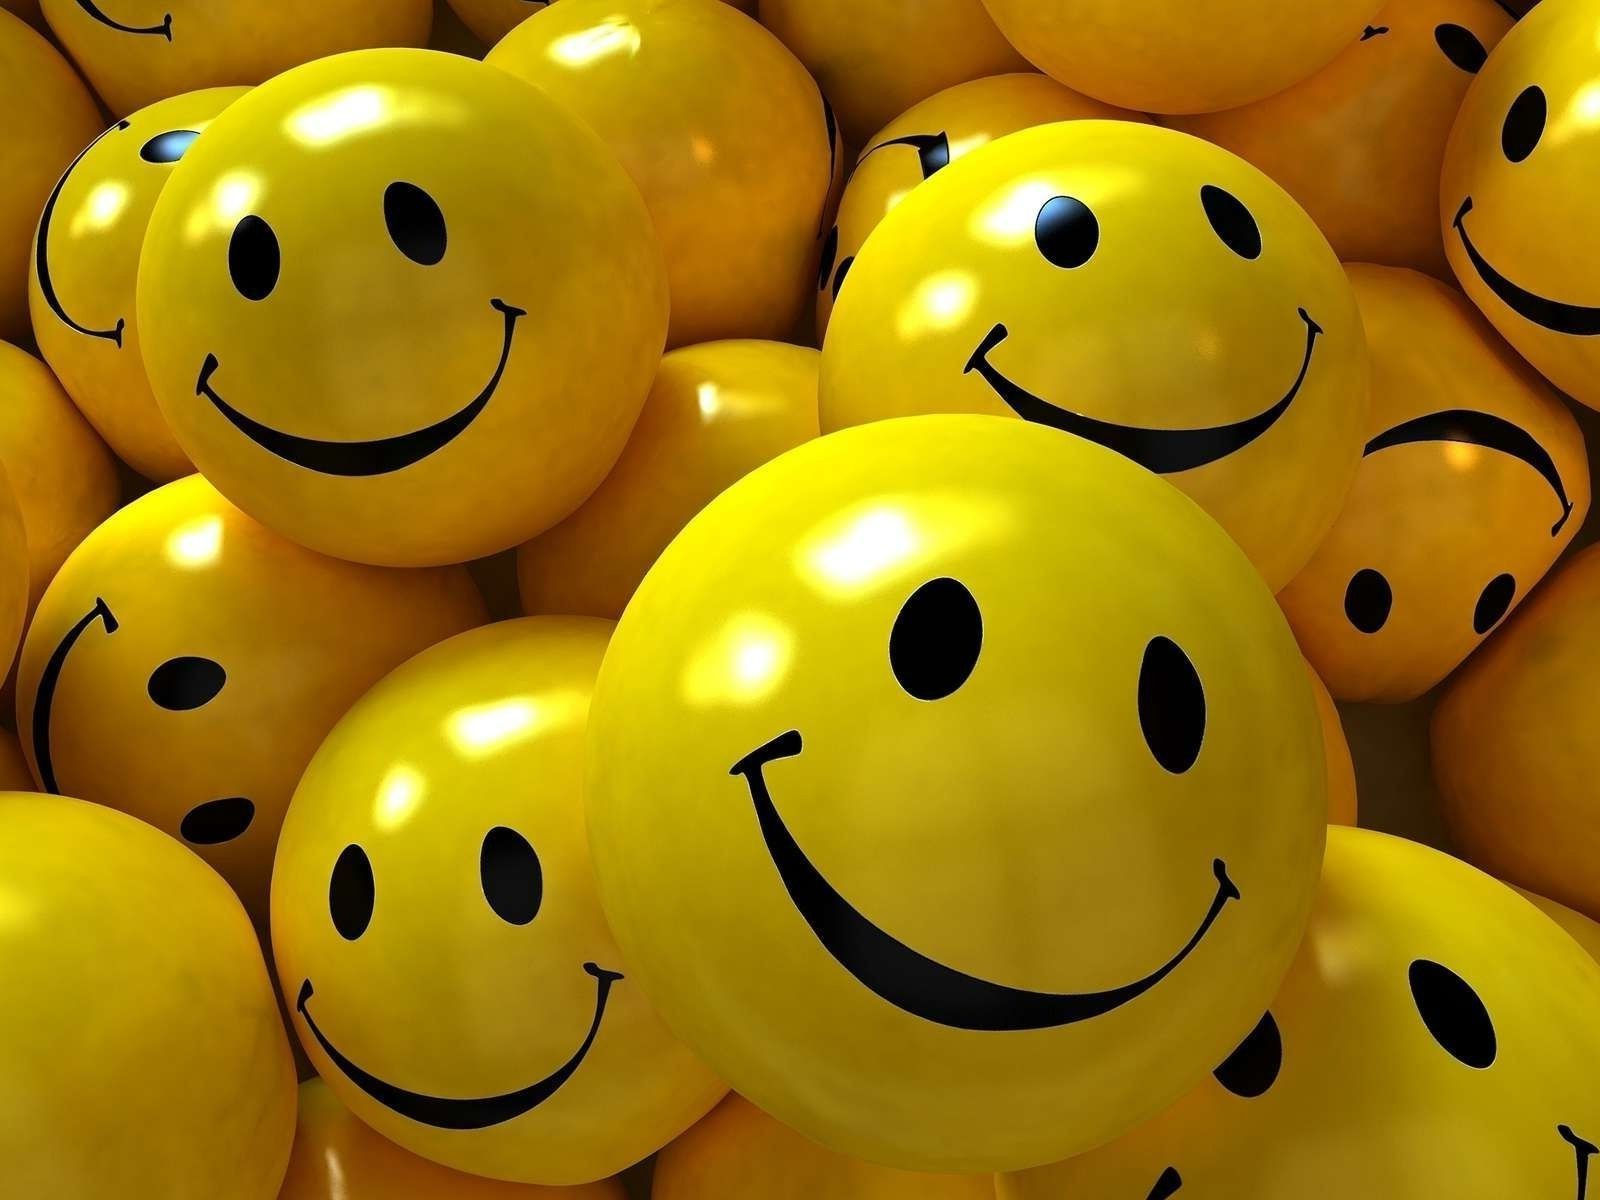 Desktop Wallpaper Yellow Smiley Face Ball, HD Image, Picture, Background, Xeodw1